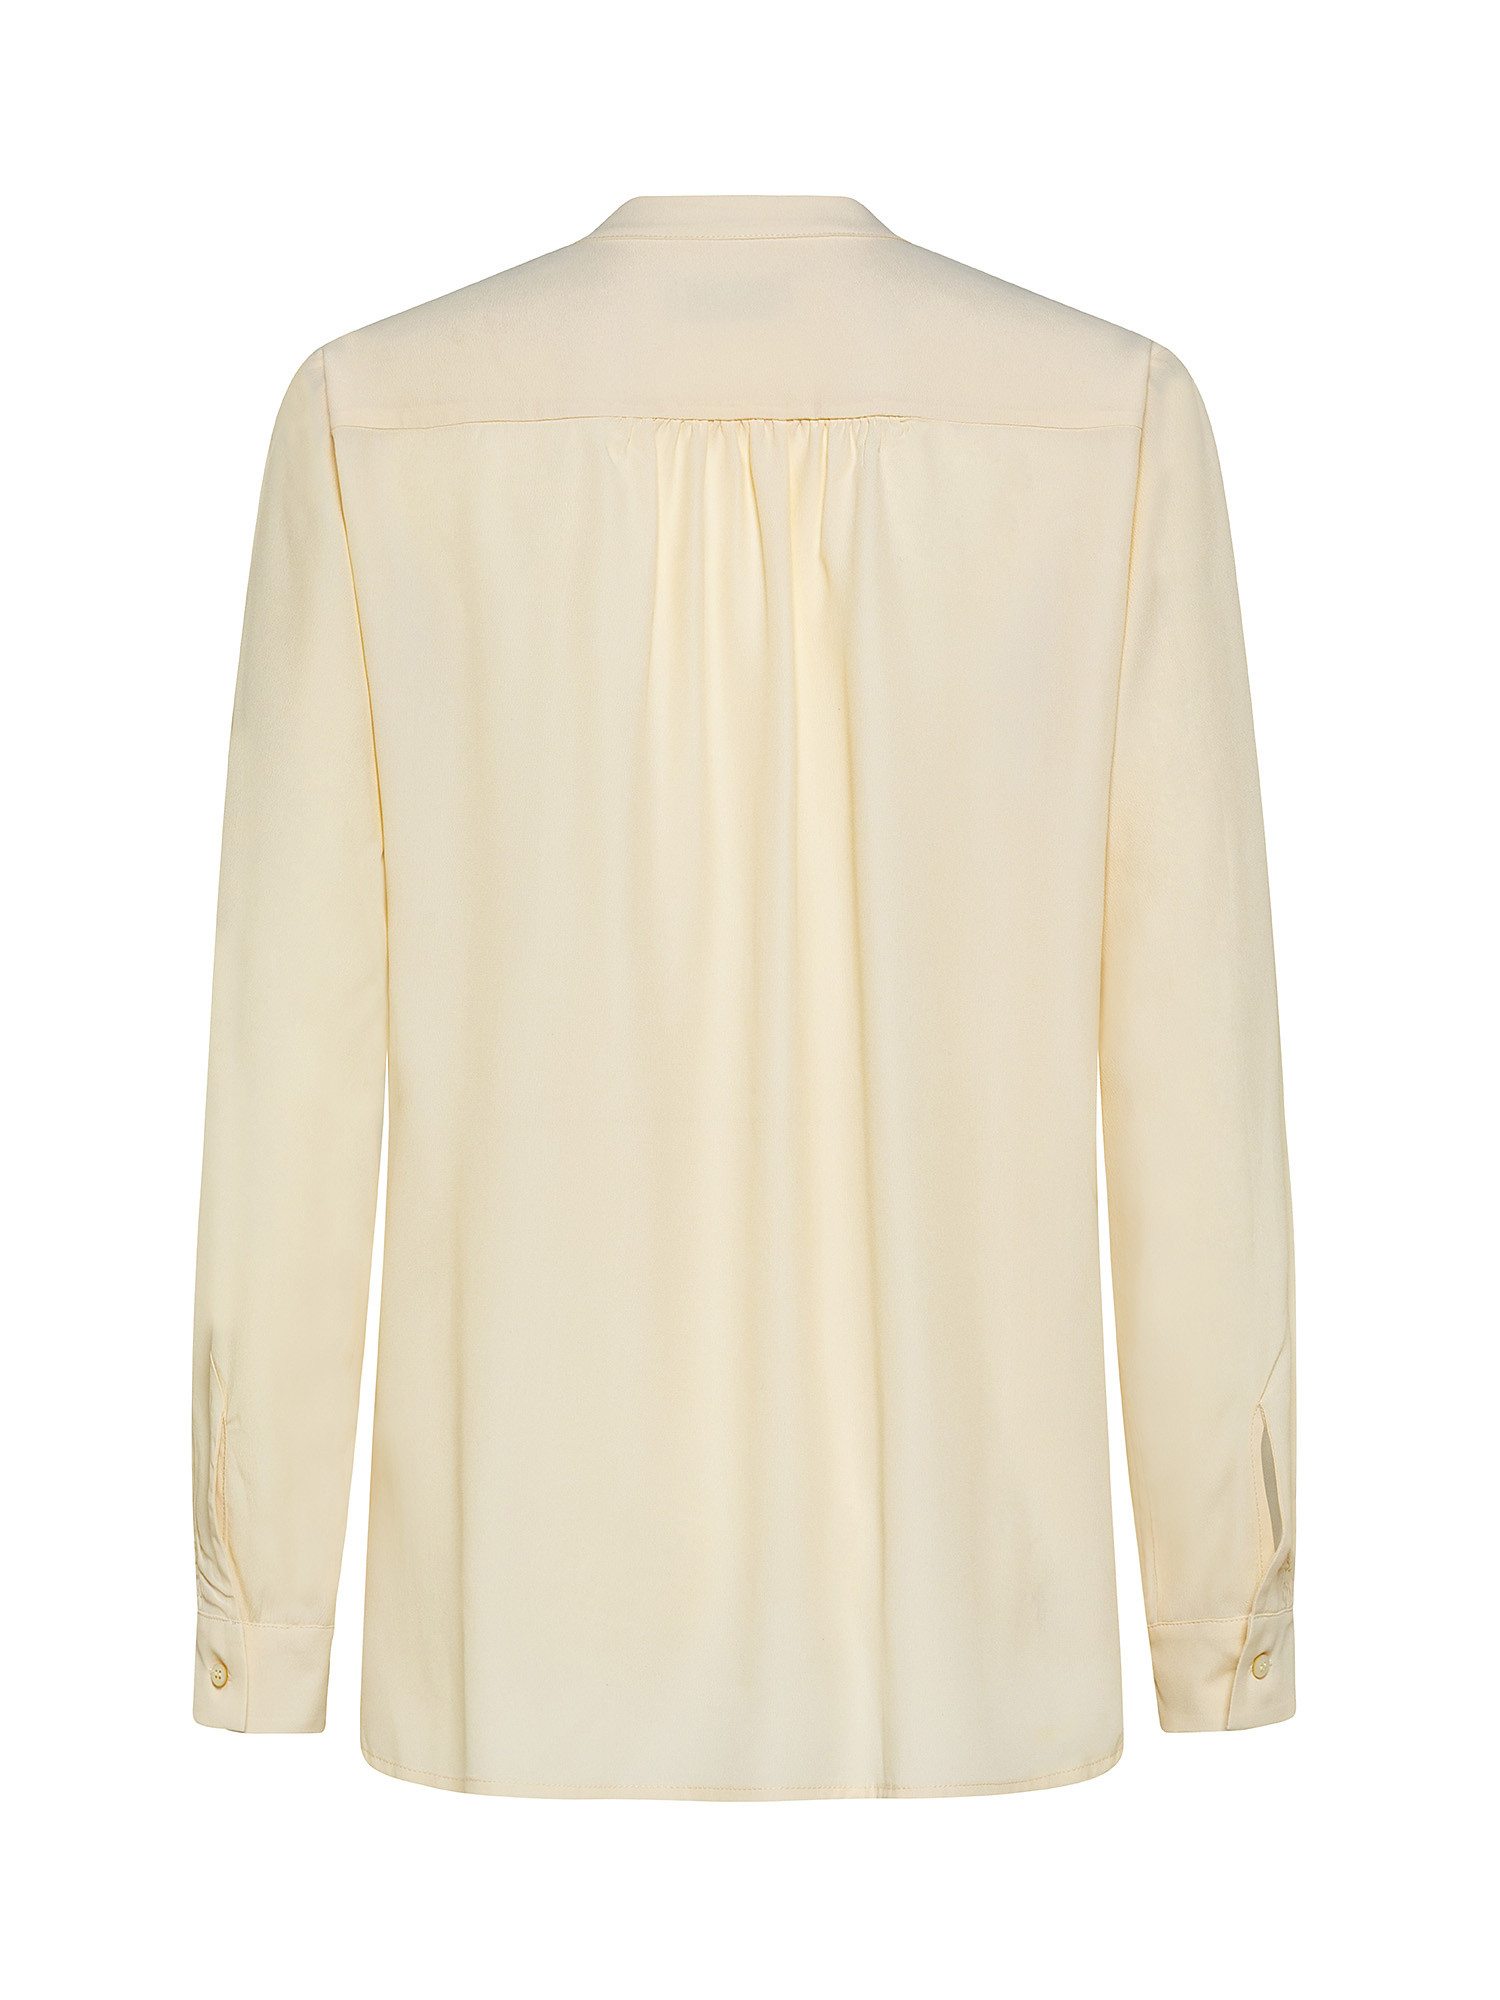 Blusa Angelica, White, large image number 1